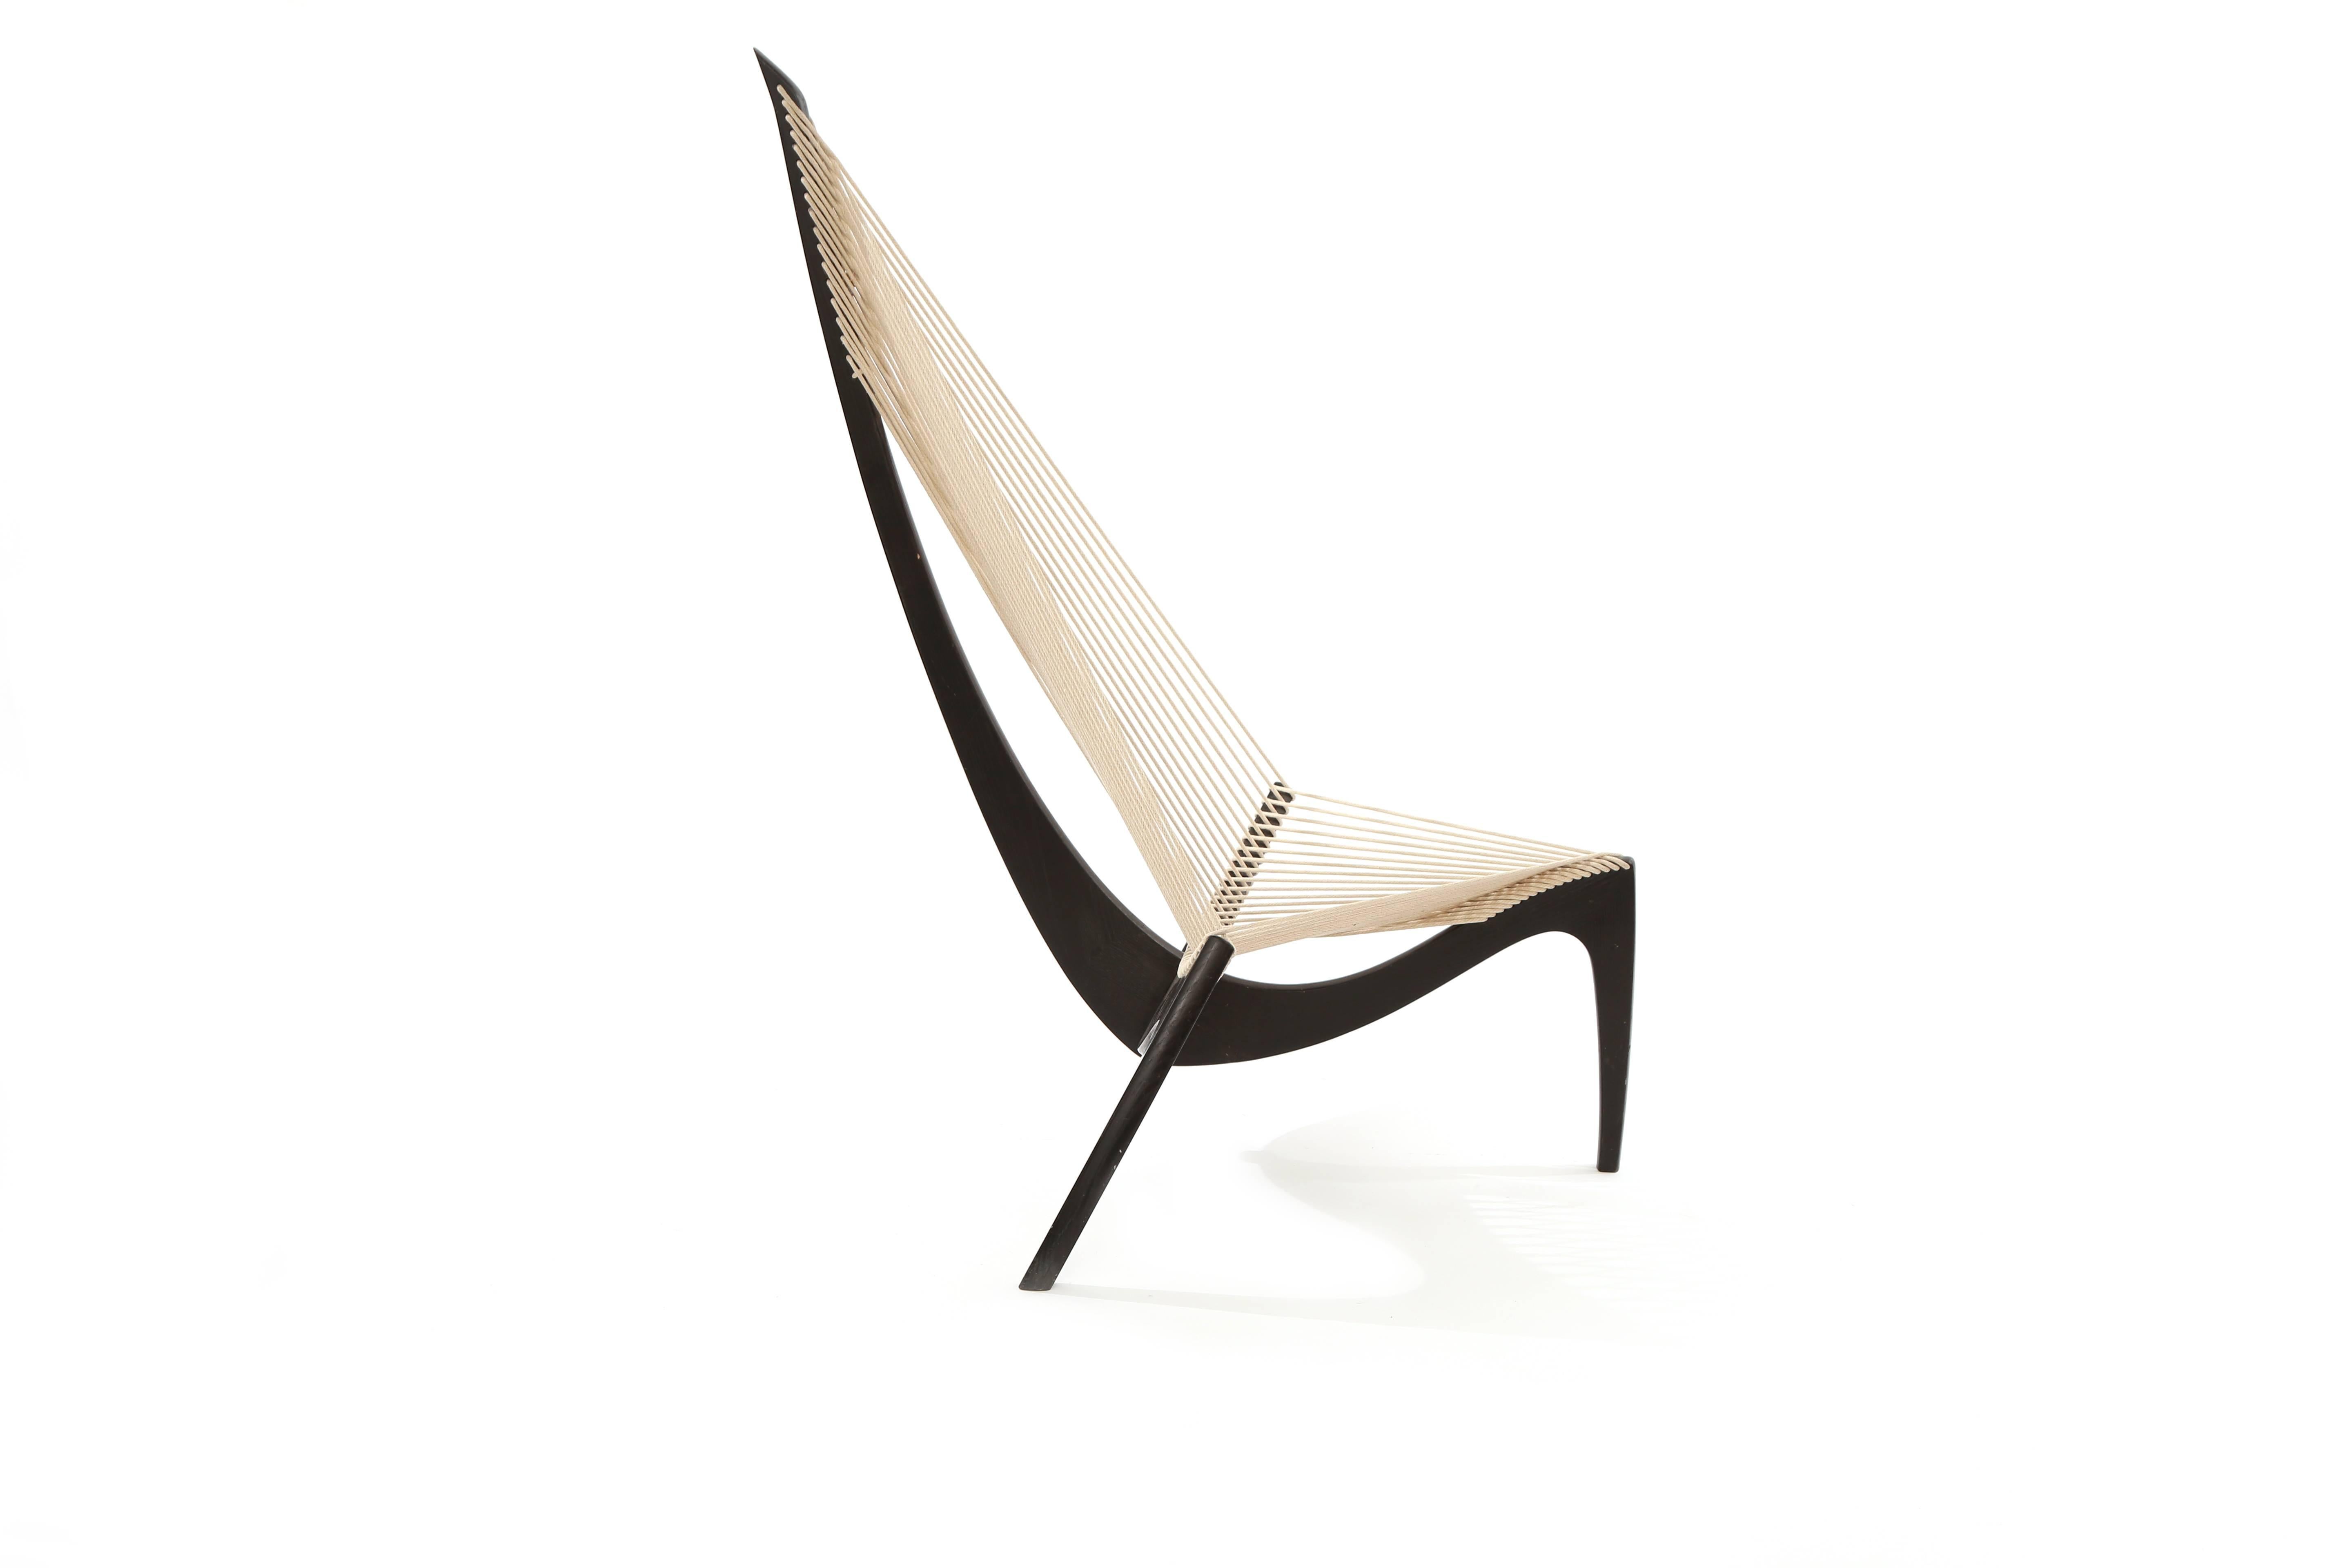 Jorgen Hovelskov harp chair form 1968. This example retains its original ebonized ash finish and has been newly and masterfully been rewoven in period correct flag halyard.